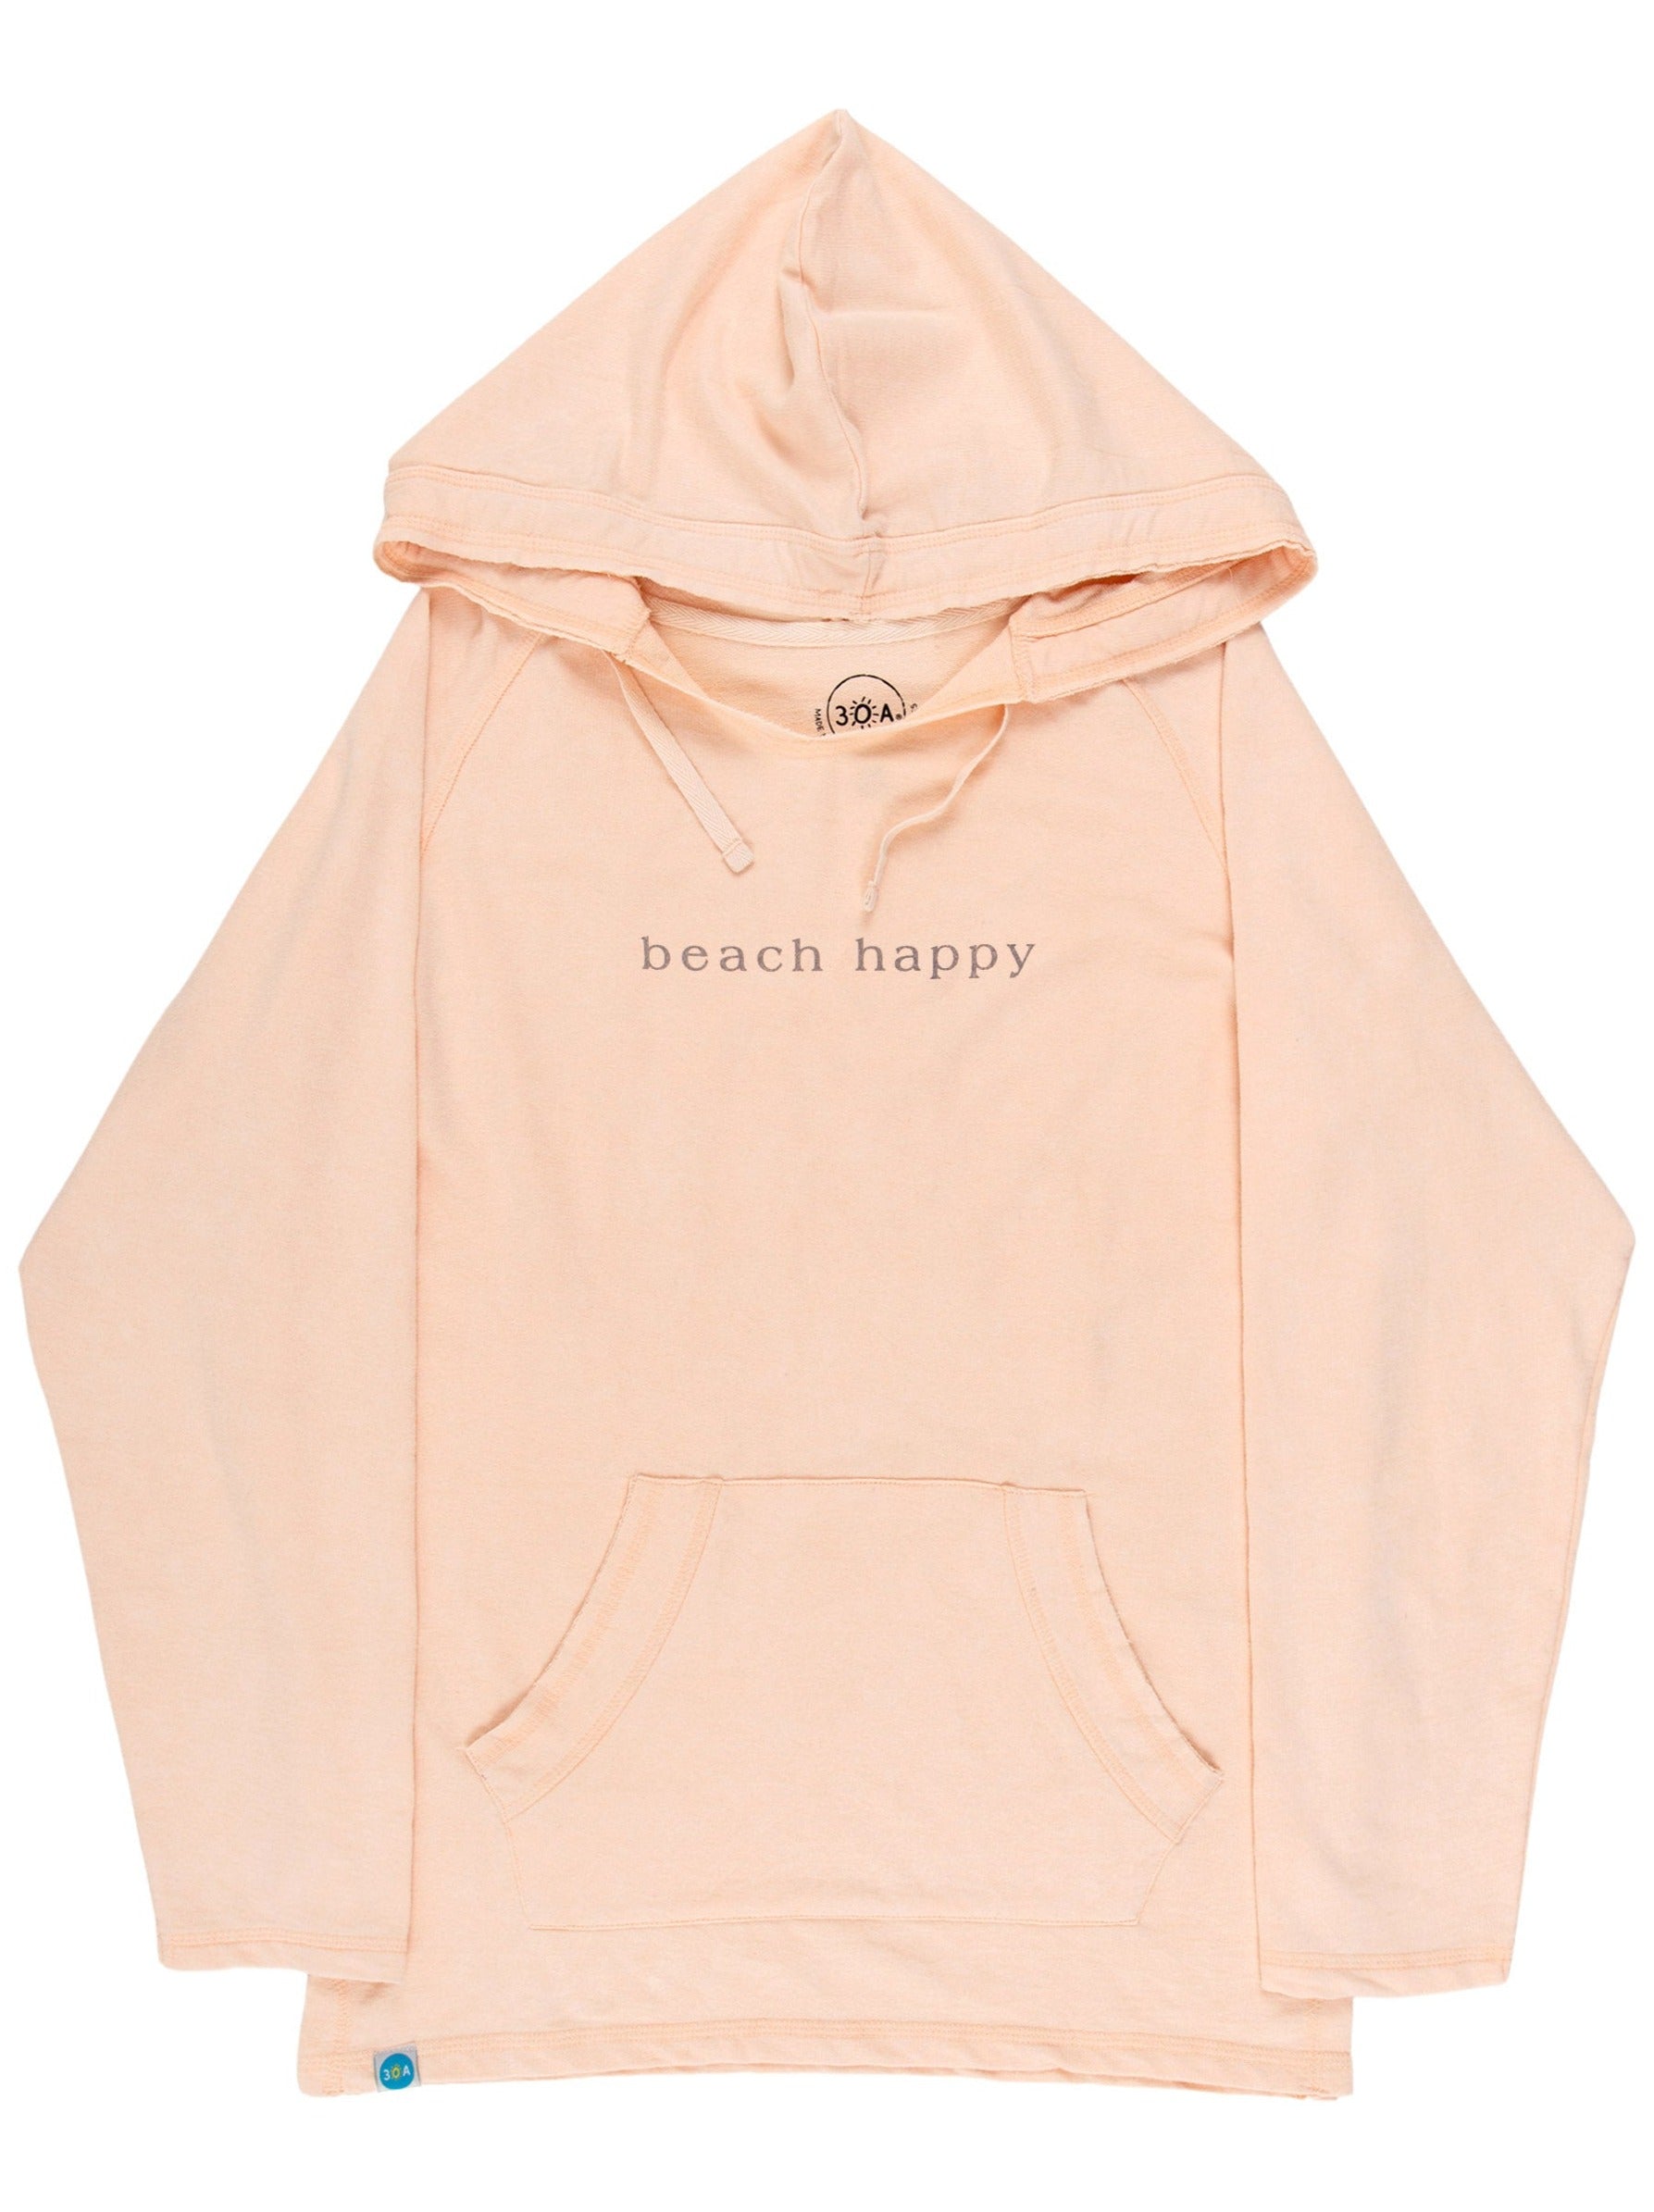 Simple Beach Happy French Terry Bonfire Hoodie